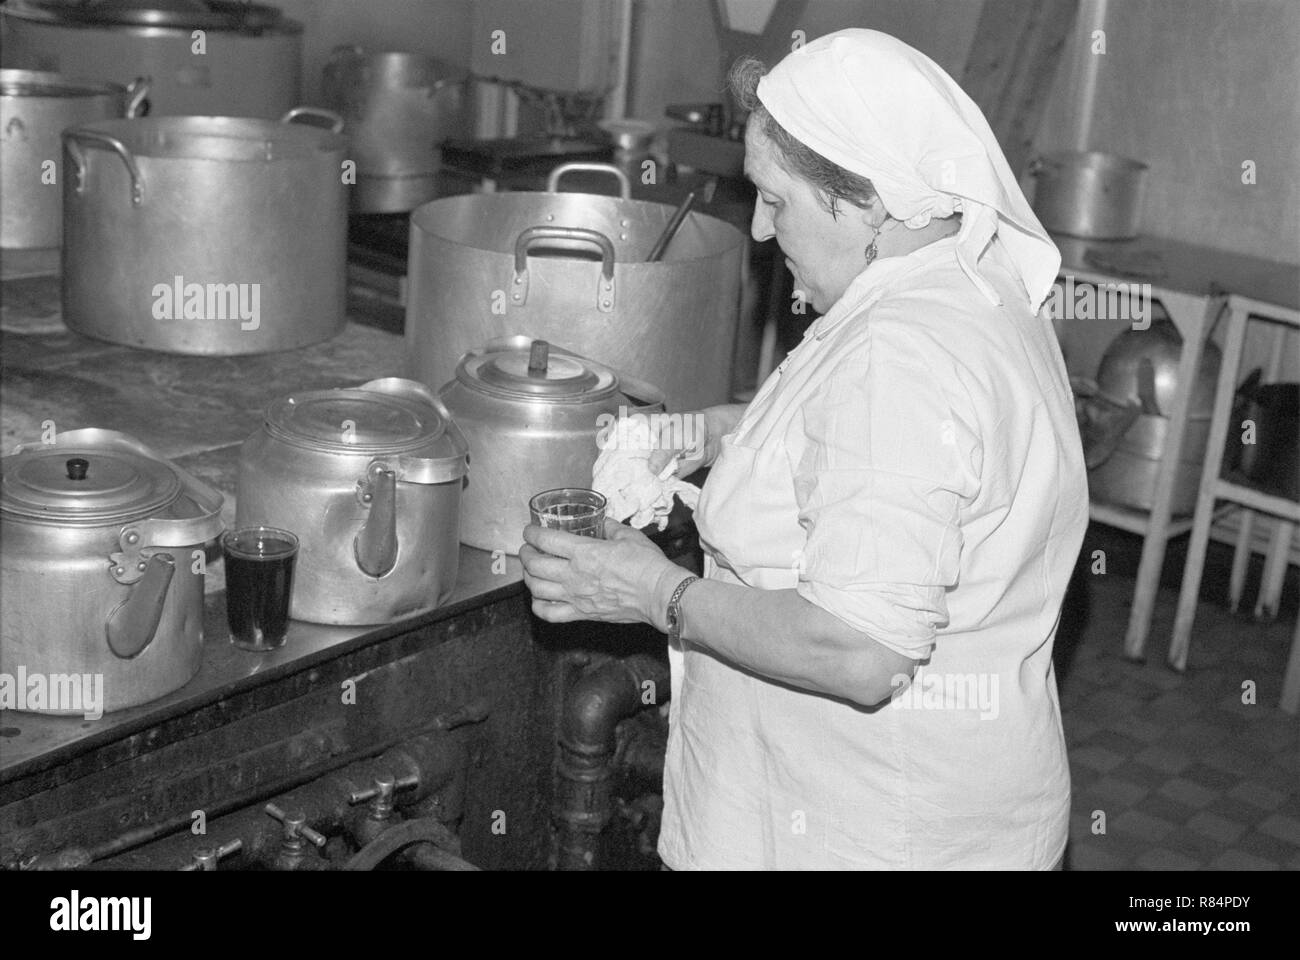 Moscow, USSR - November 23, 1989: Canteen in the Ministry of the Automotive Industry of the USSR. Woman emloyee of the canteen makes tea in large metal tea pot in the cooking area of the canteen. Stock Photo